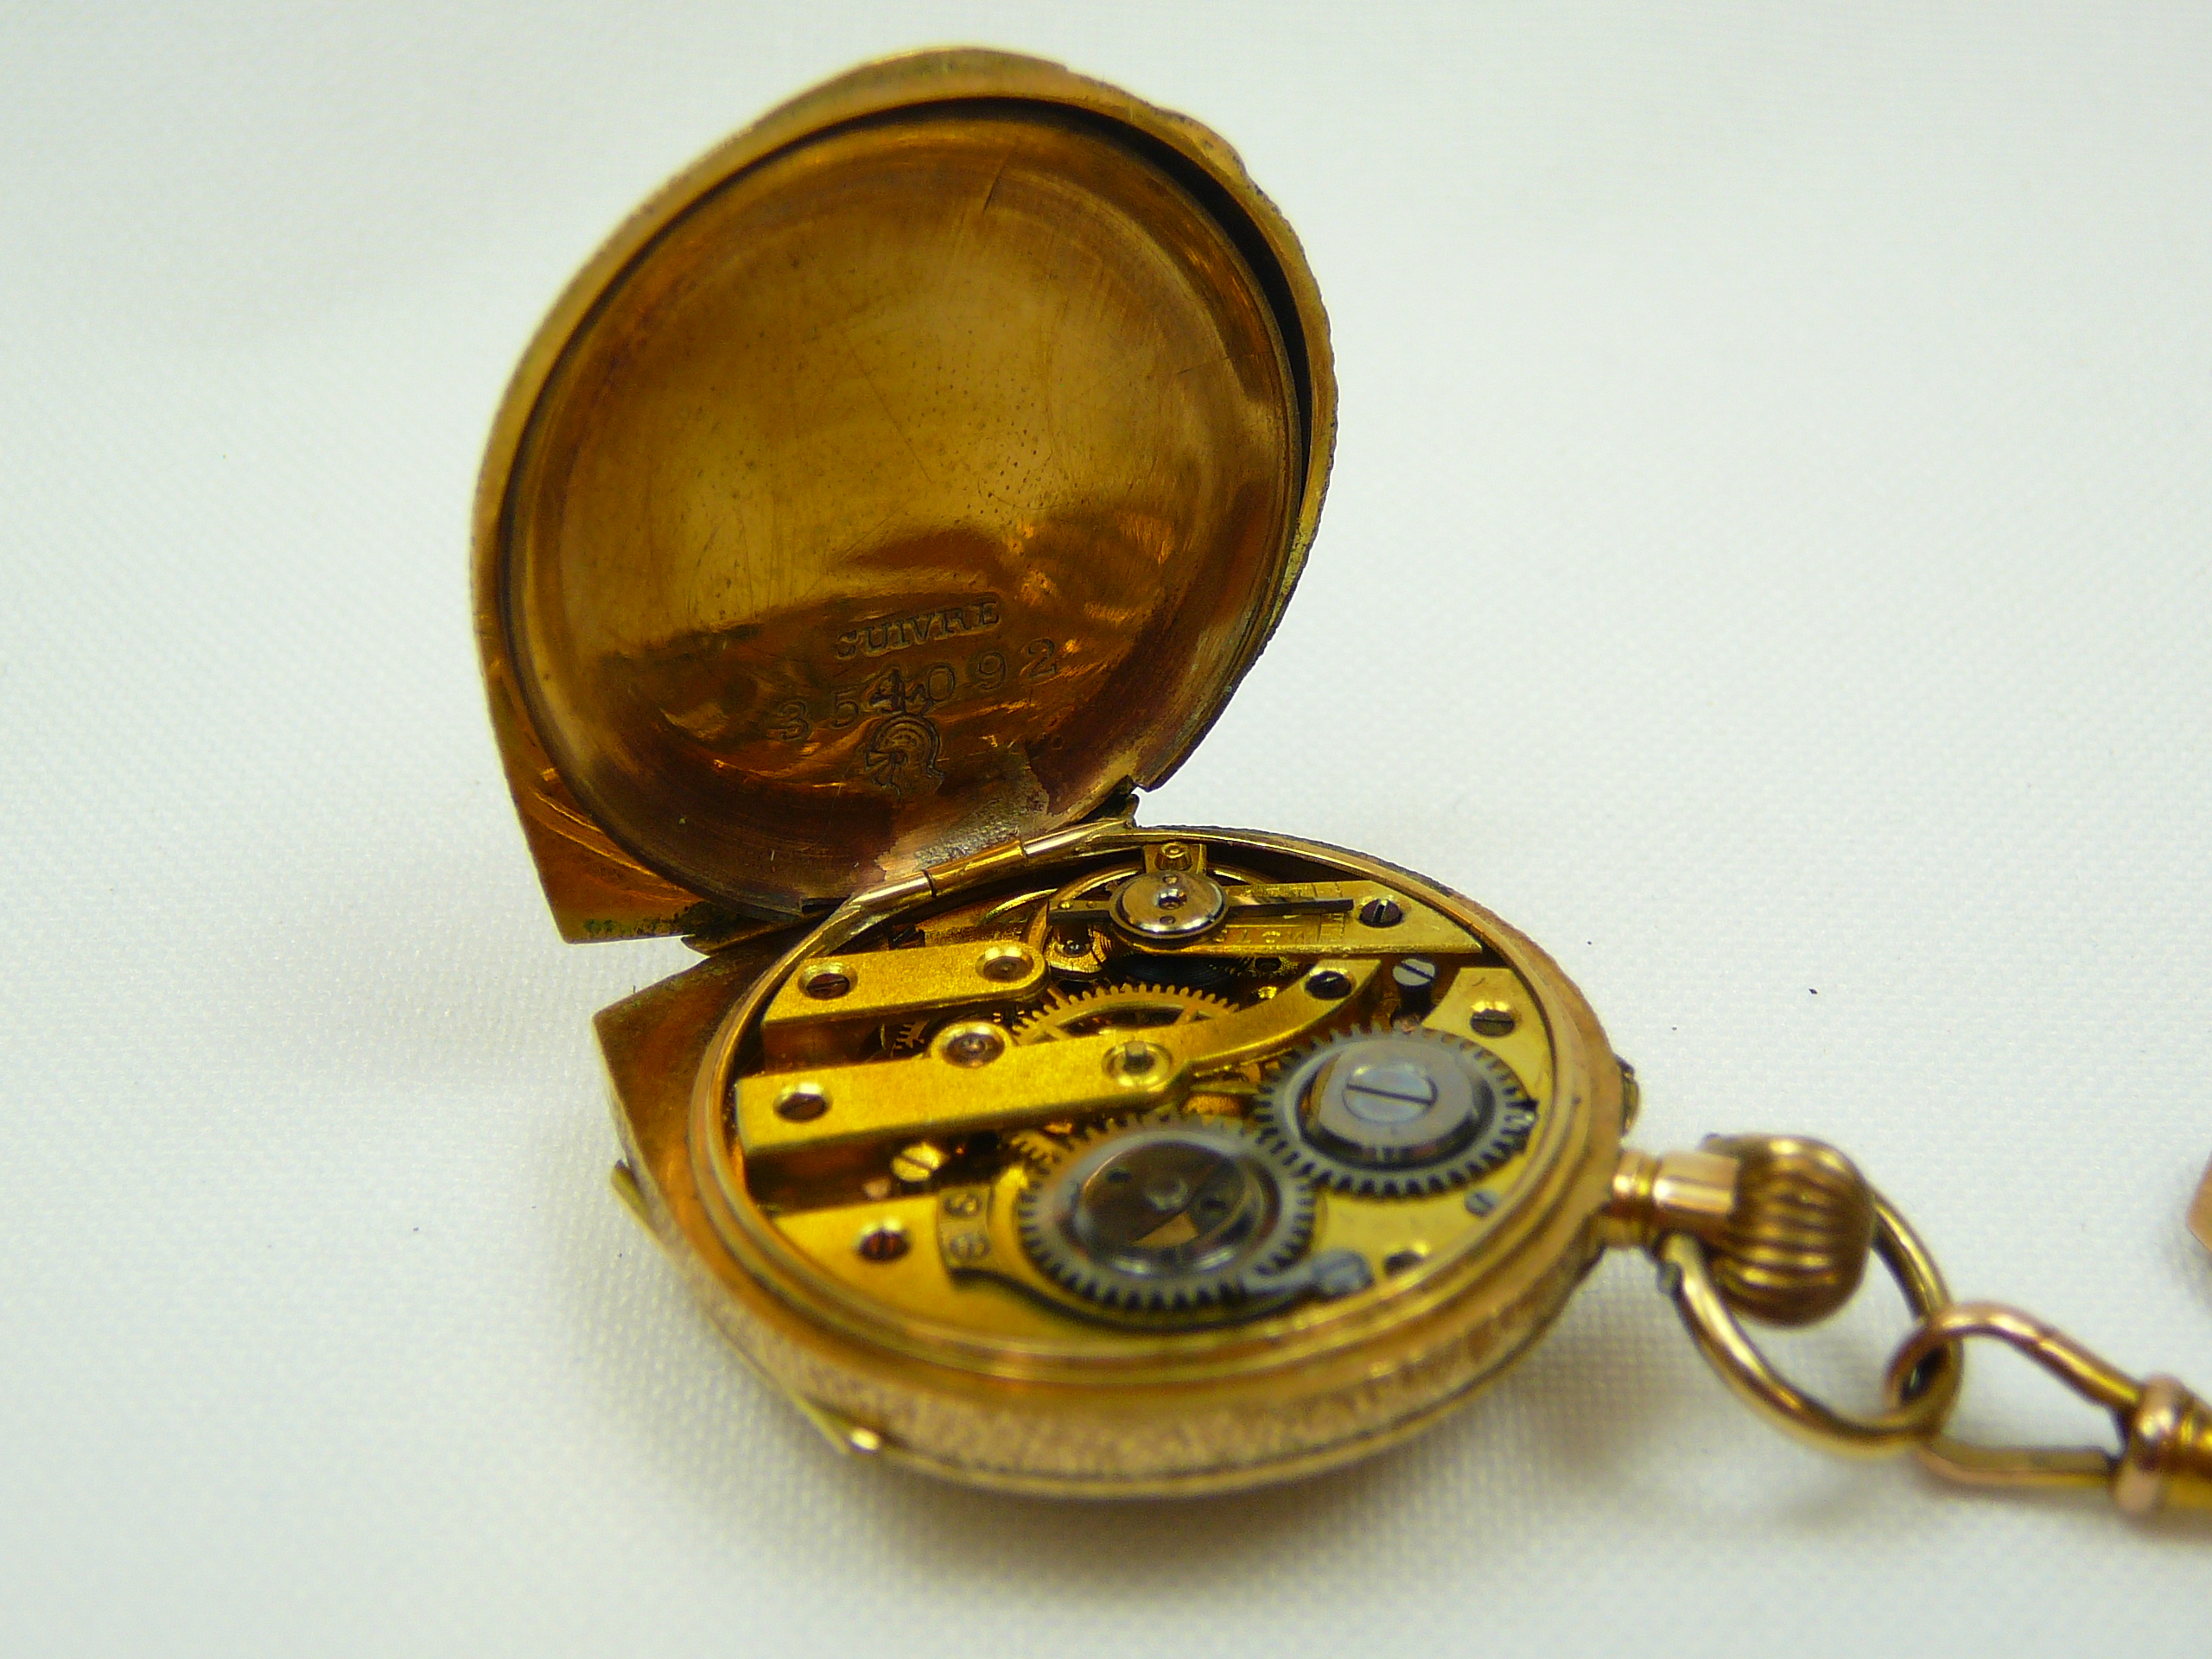 Ladies Antique Gold Brooch Fob Watch - Image 7 of 8